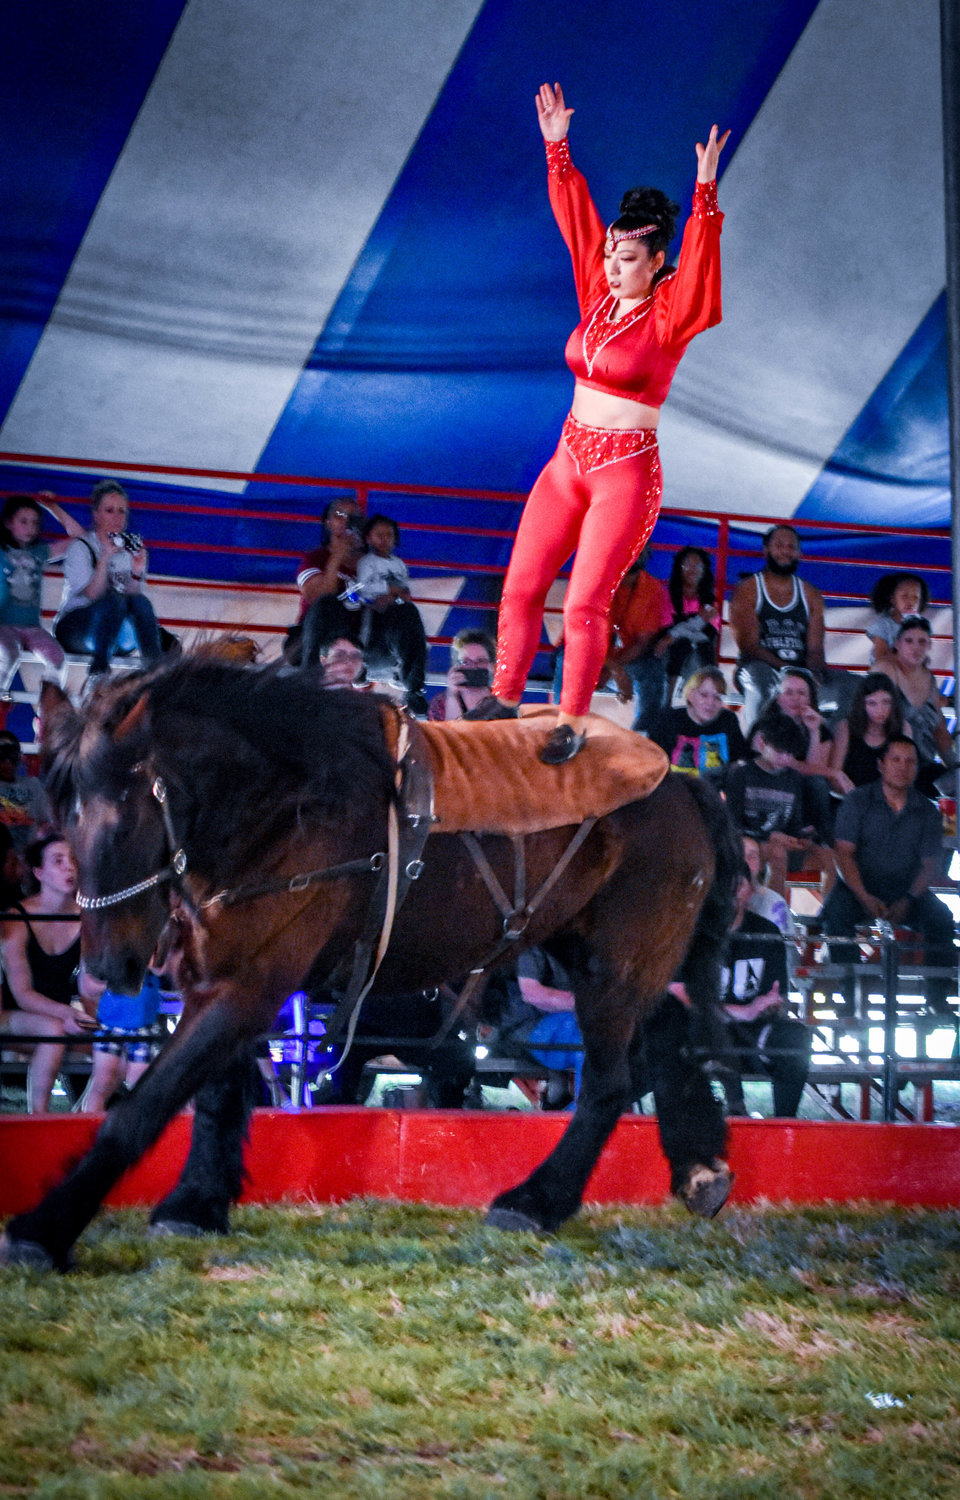 Among the many performances during the circus are trick horseback riding.